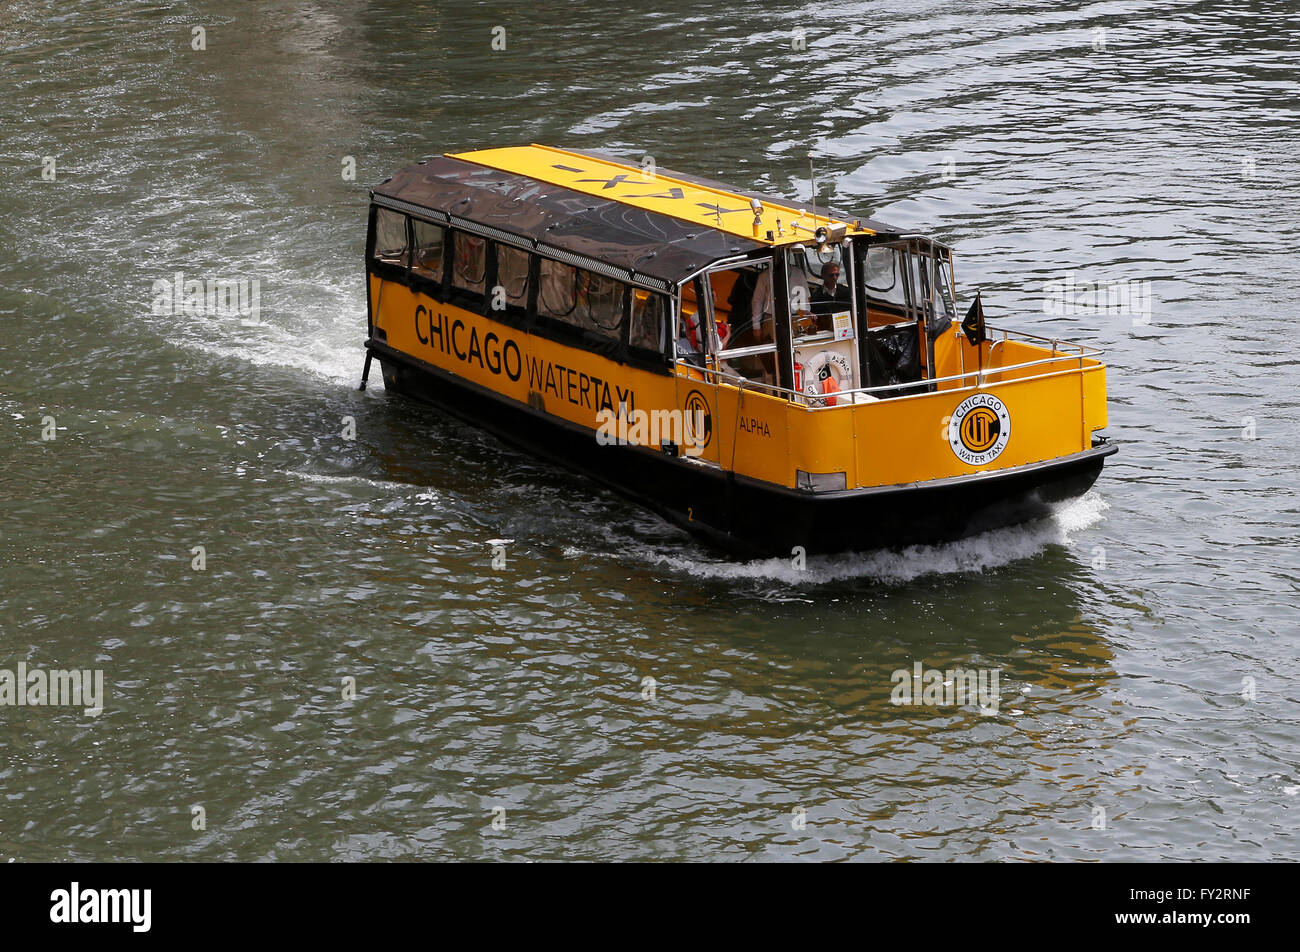 A Chicago water taxi makes its way up the Chicago River in Chicago, Illinois, United States of America Stock Photo